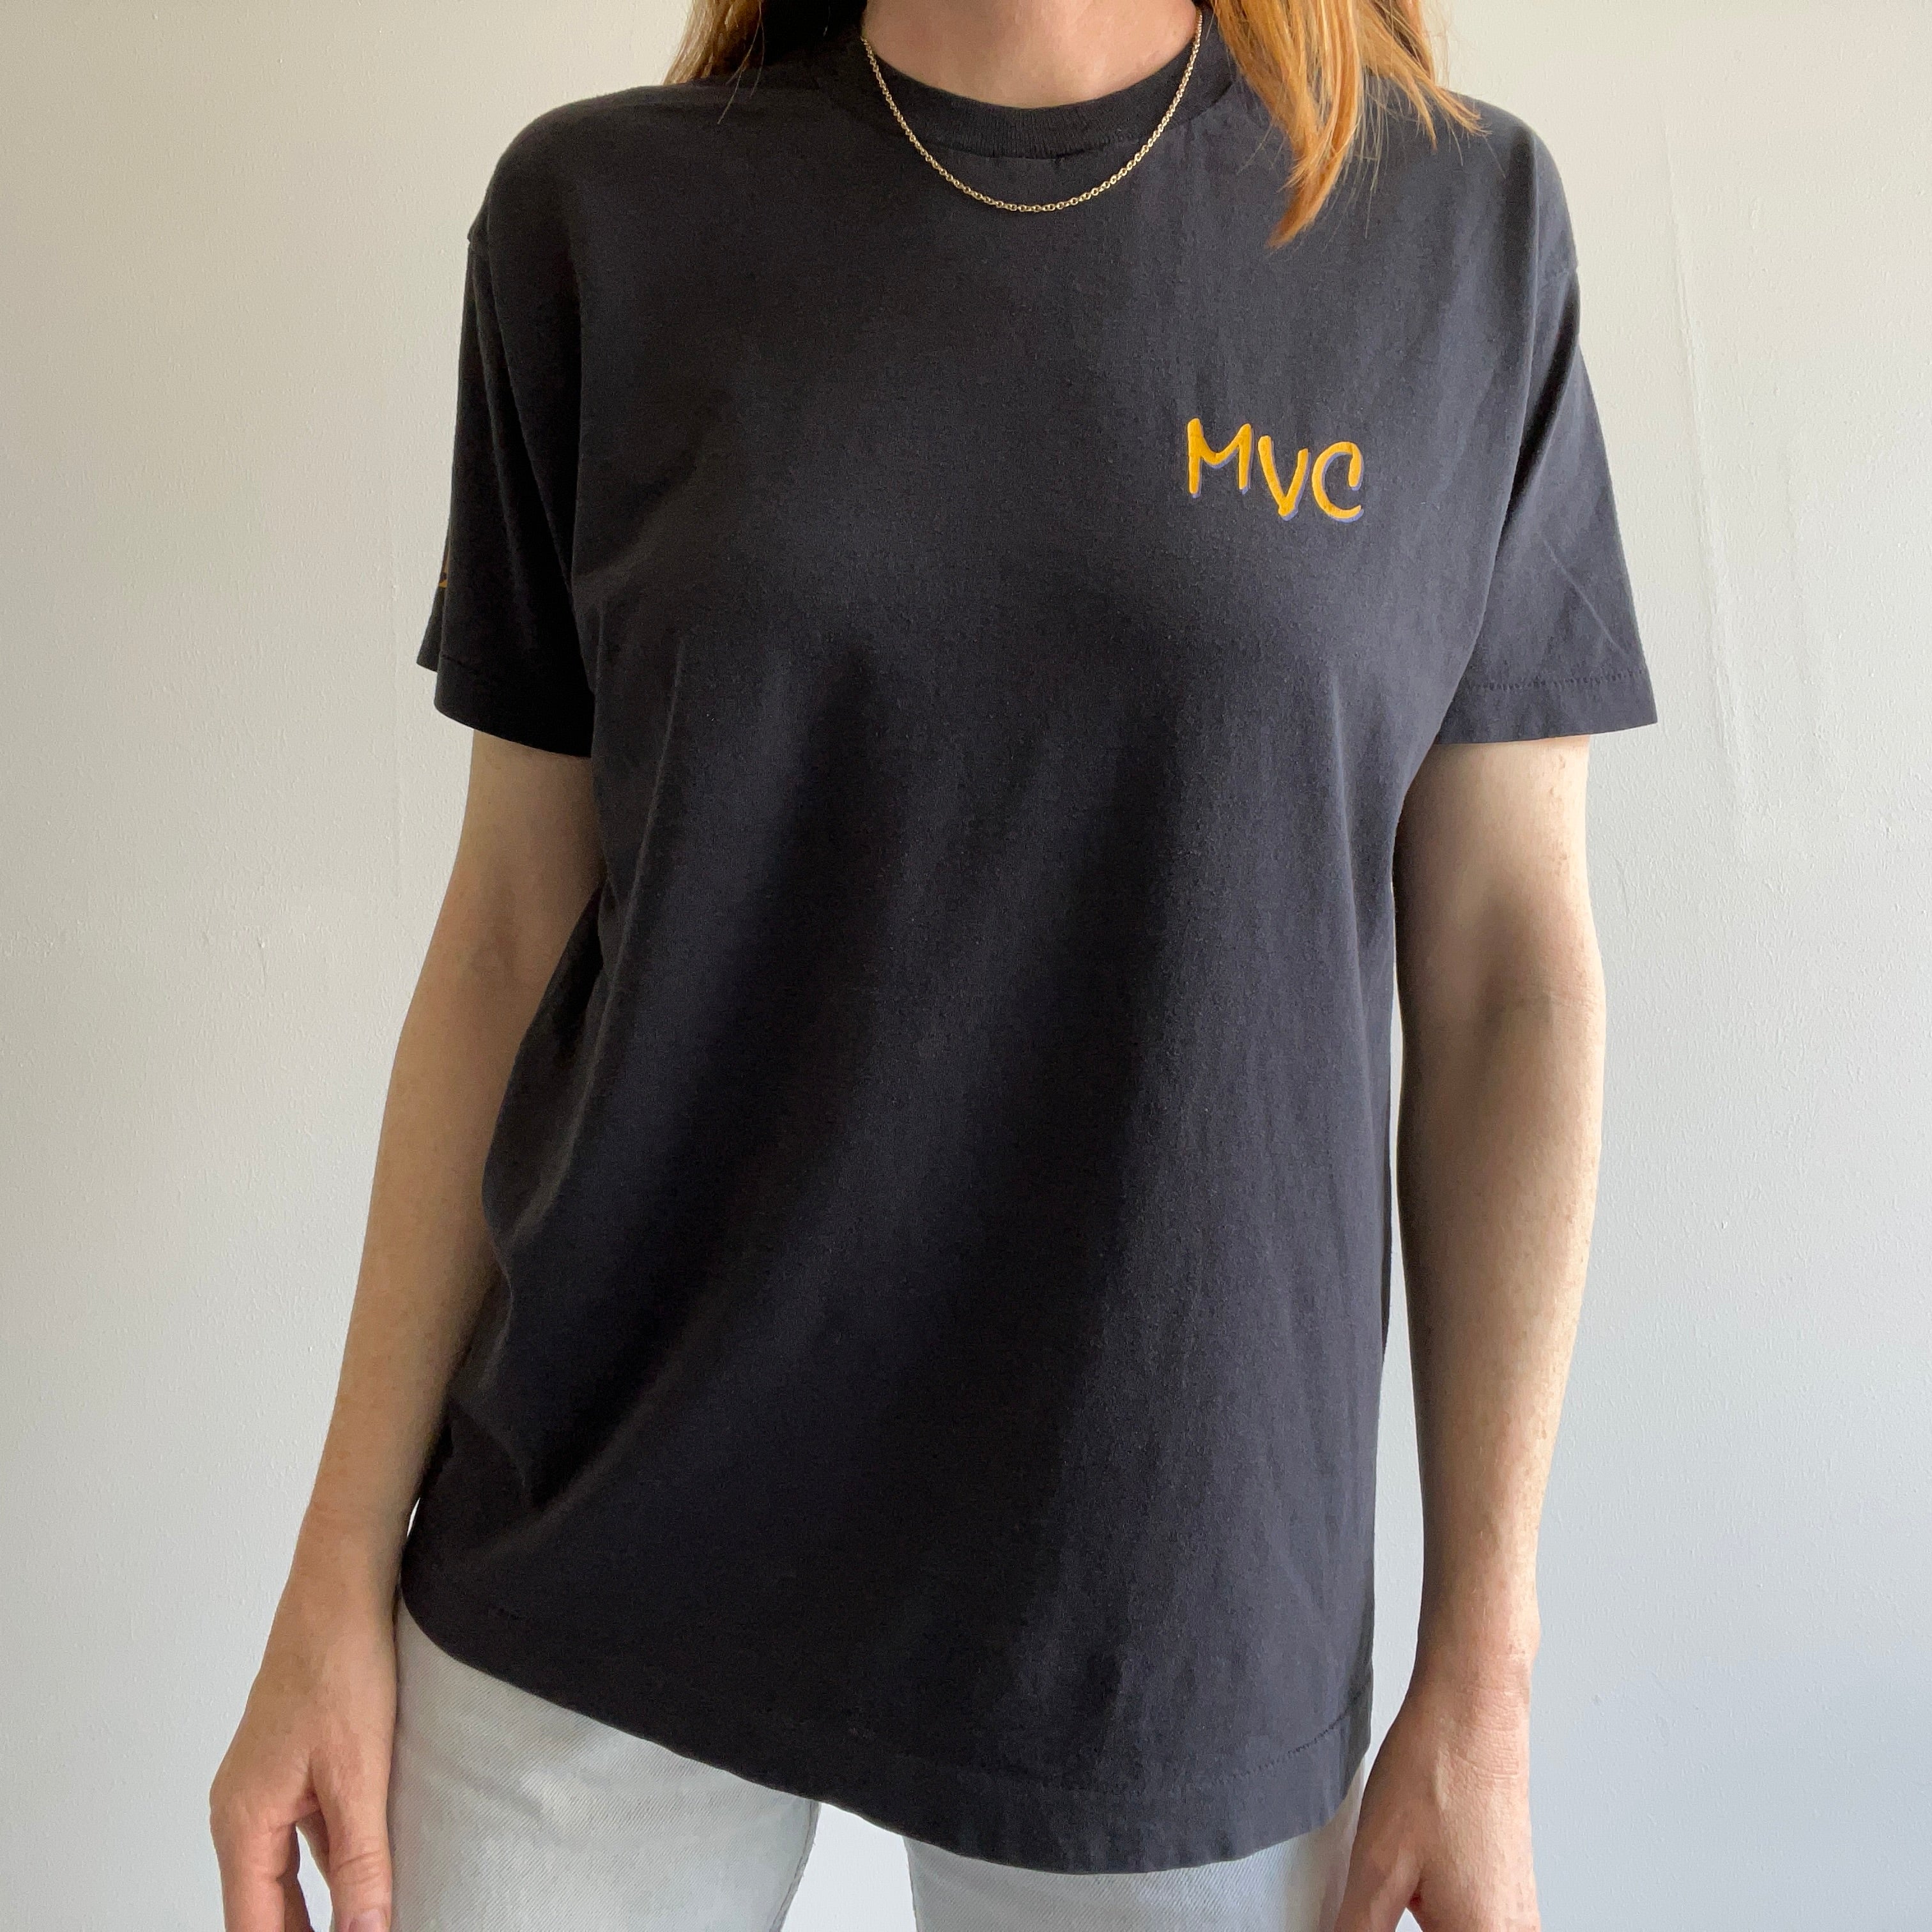 1980s Music Video Connection T-Shirt